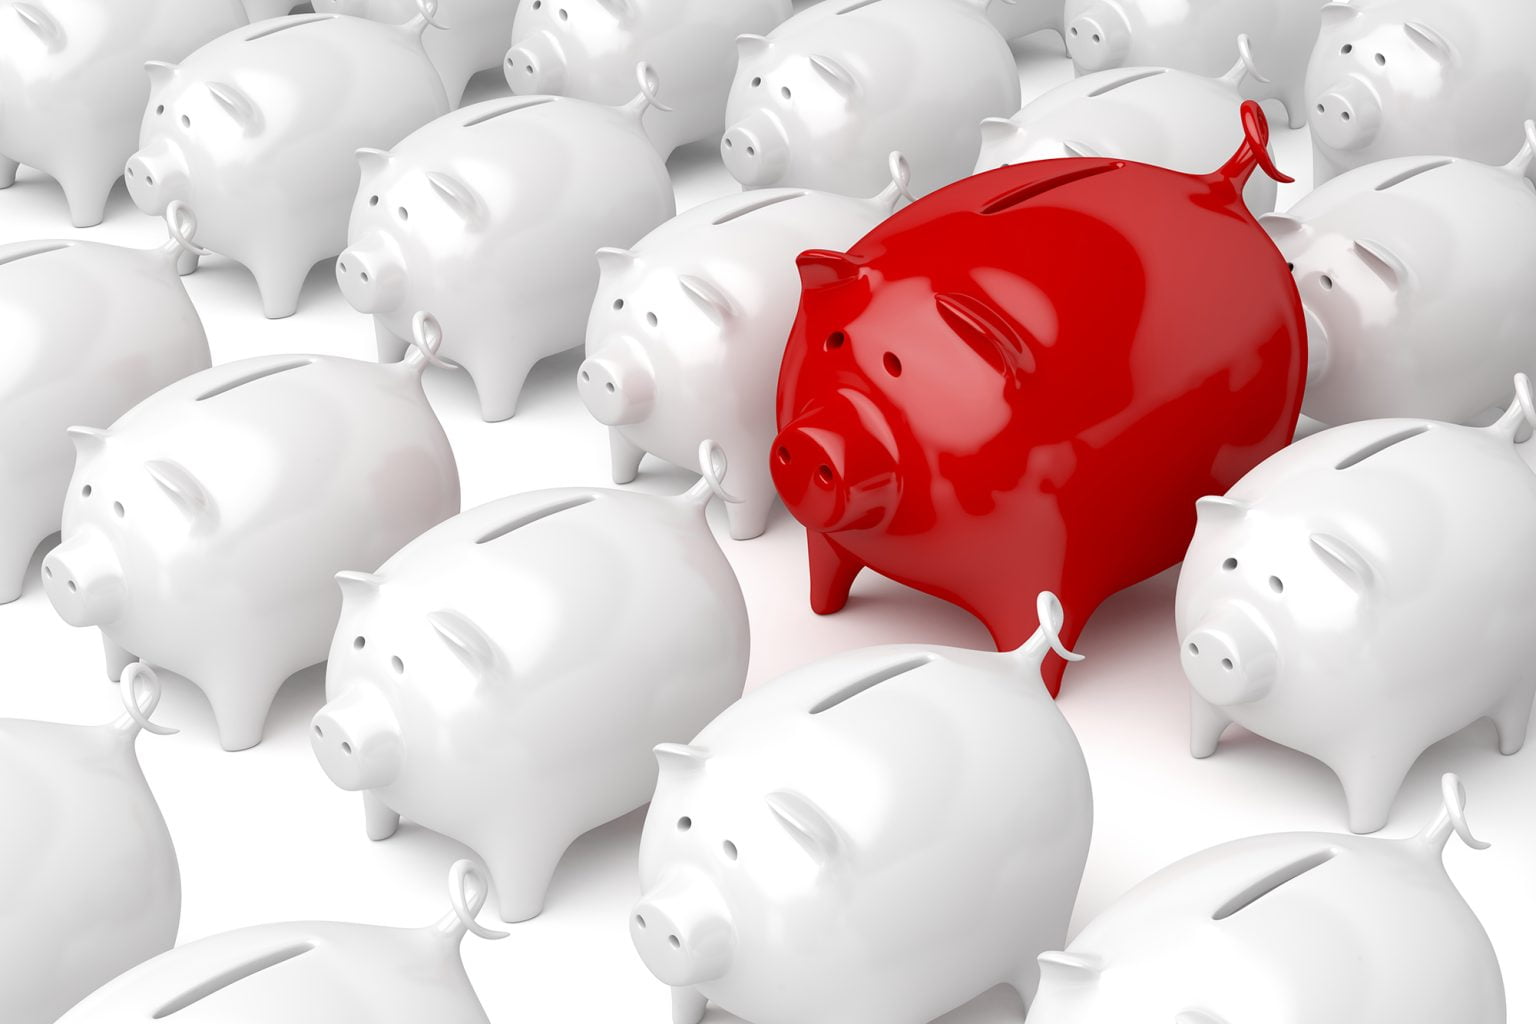 ows of white piggy bank with one larger red piggy bank